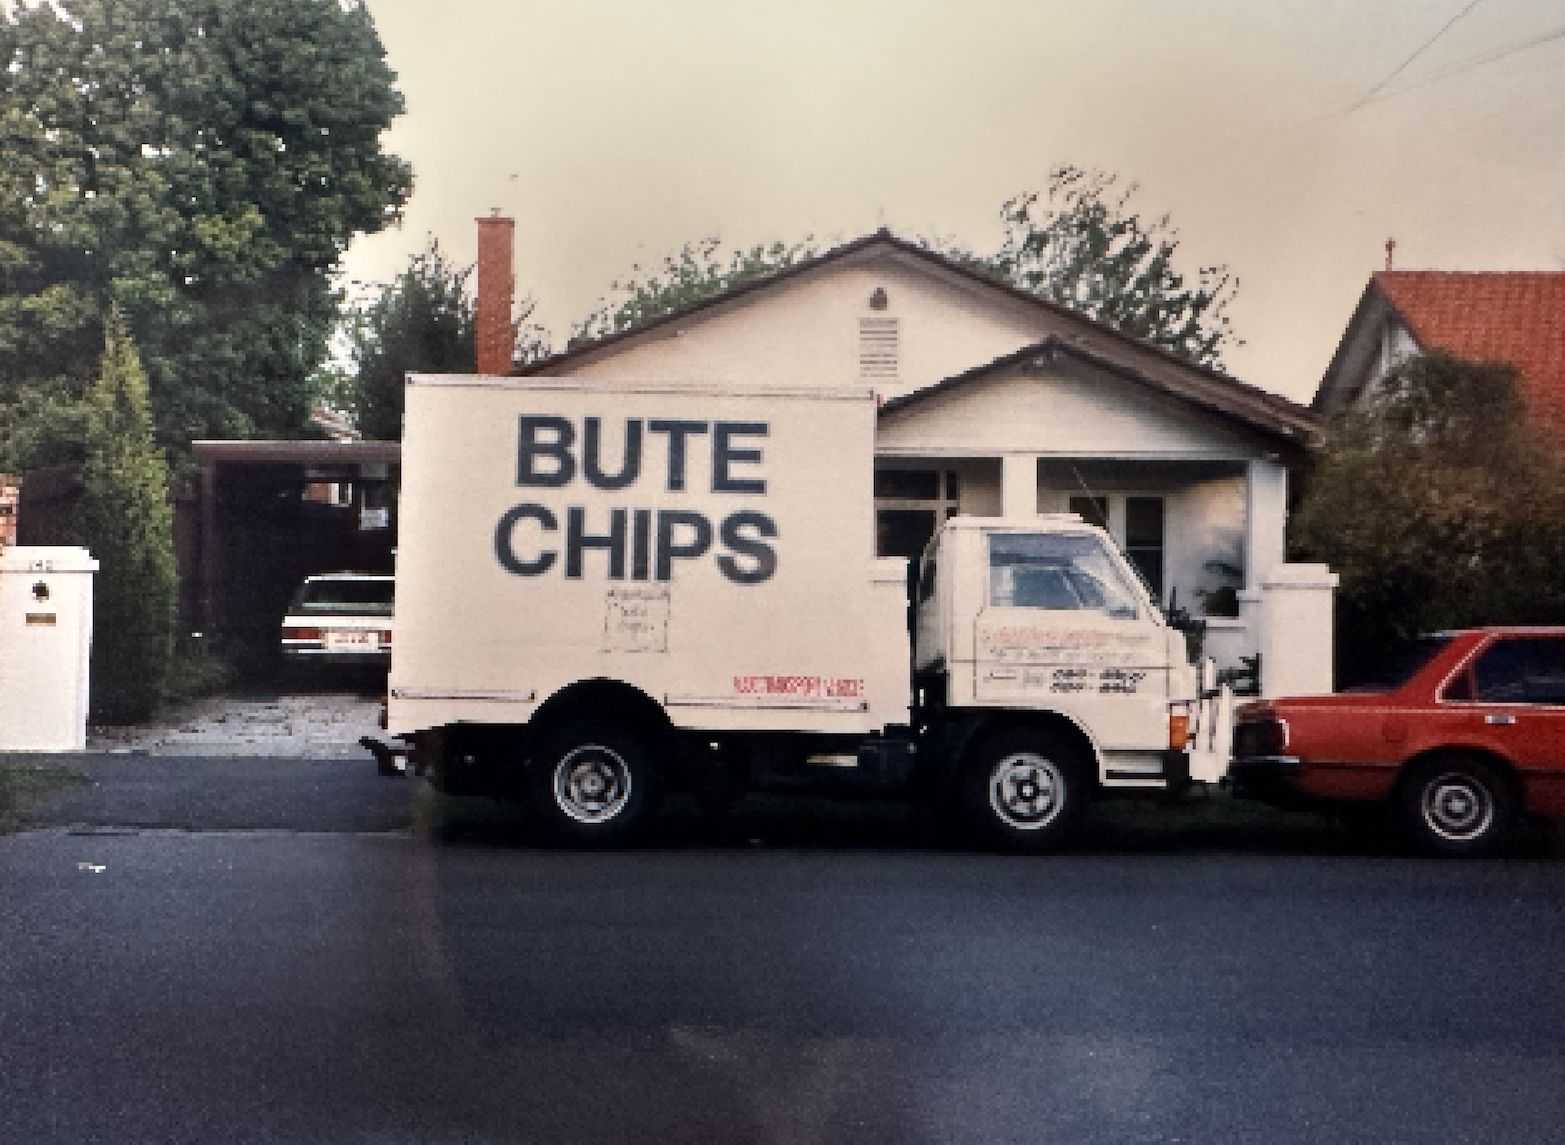 Bute Chips purchased their first refrigerated vehicle.